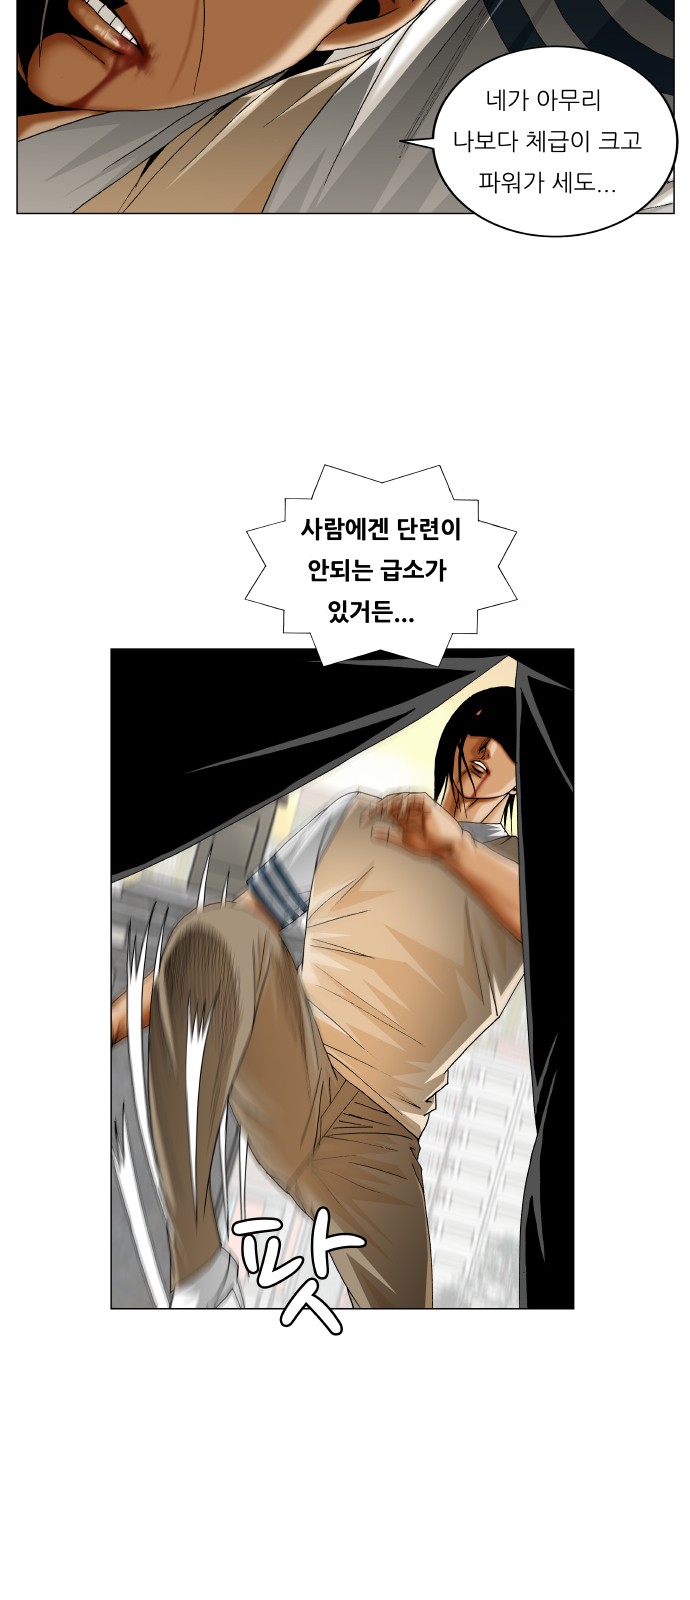 Ultimate Legend - Kang Hae Hyo - Chapter 278 - Page 4